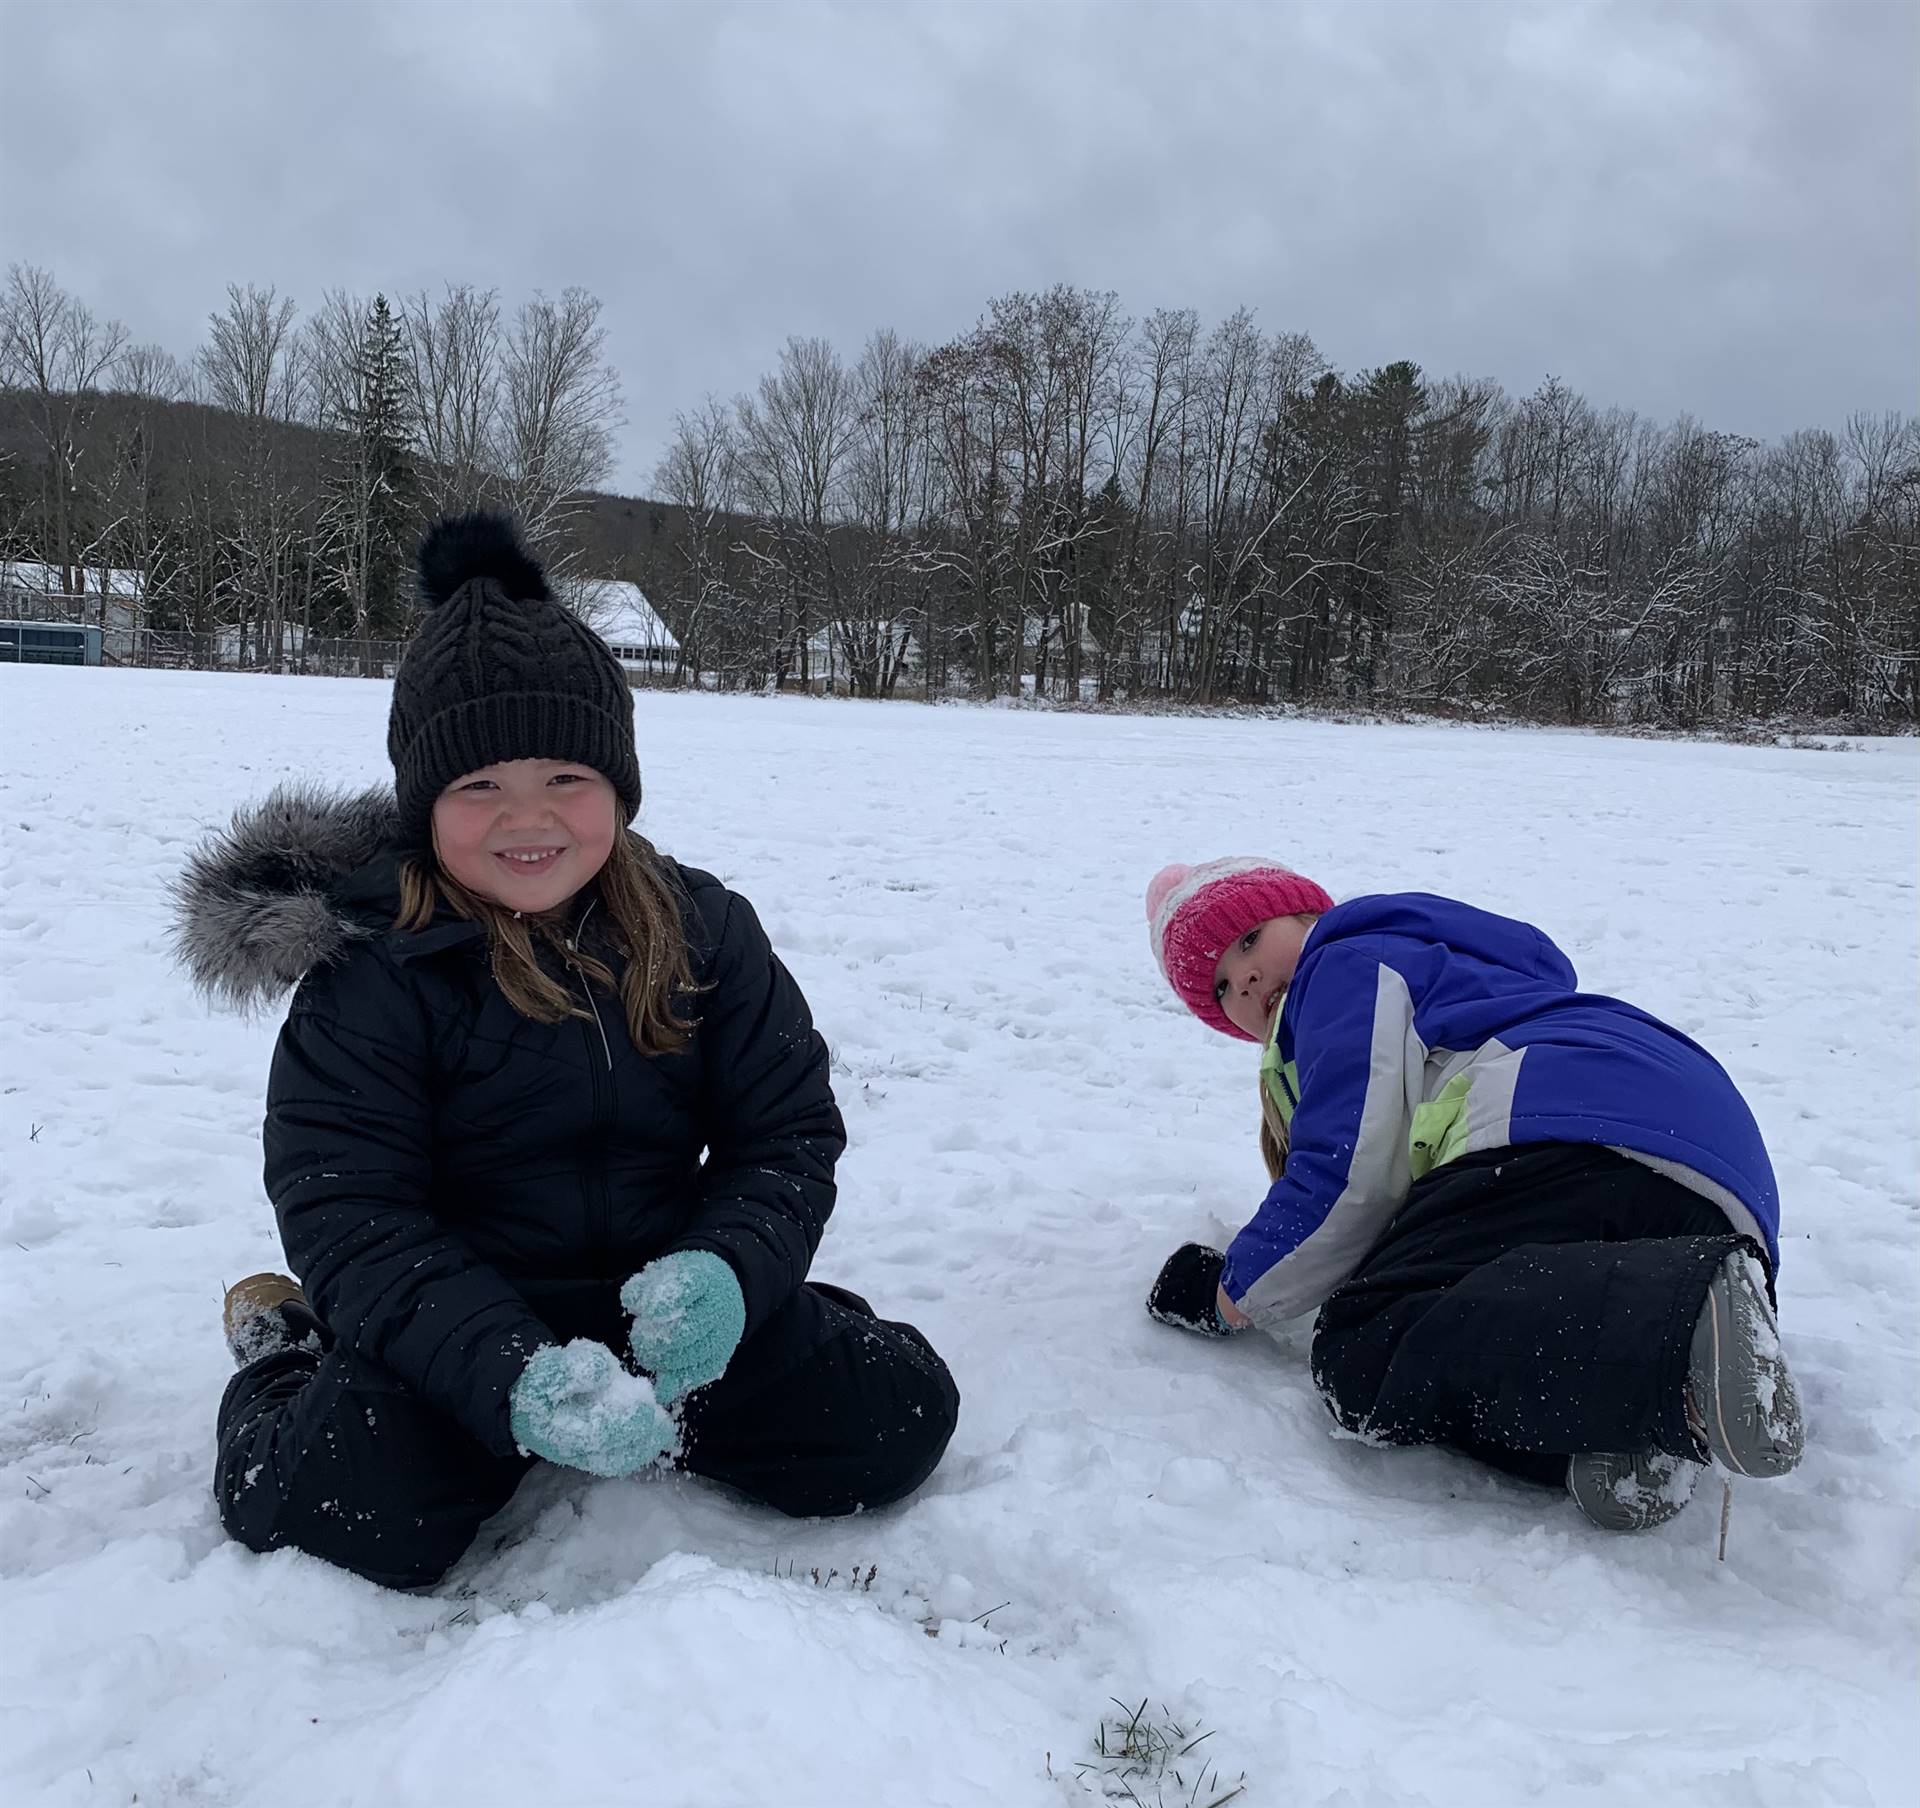 2 kids playing in snow